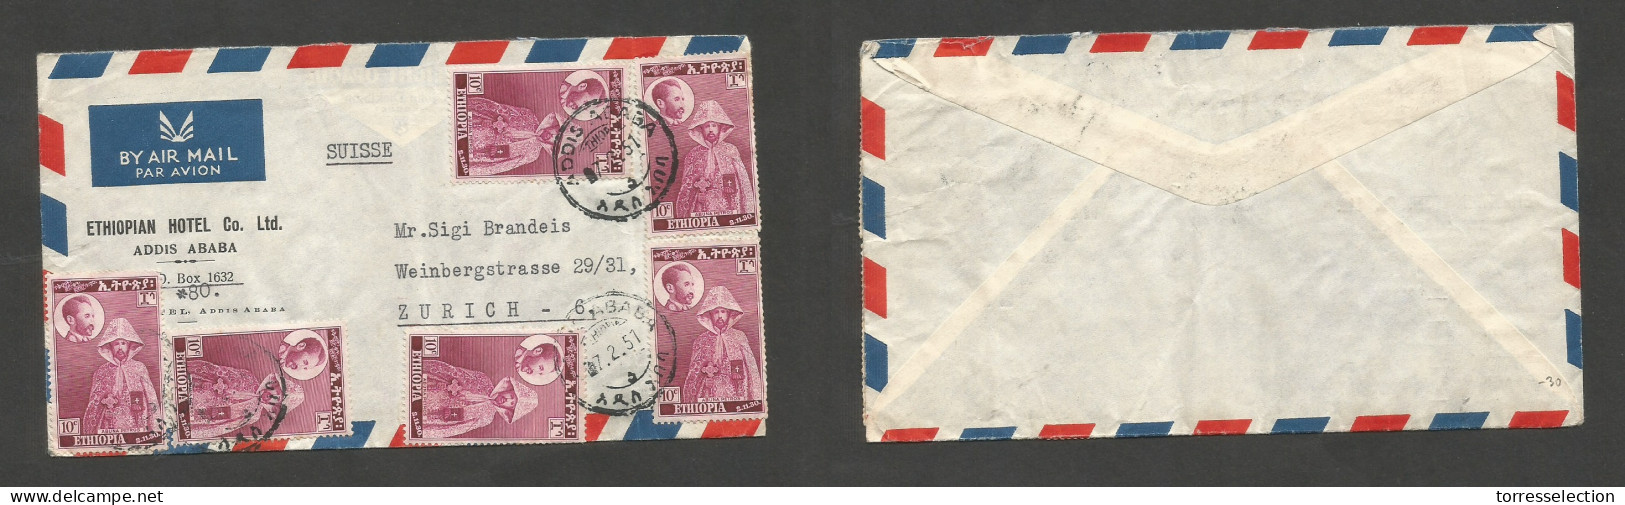 ETHIOPIA. 1951 (7 Febr) Addis Ababa - Zurich, Switzerland. Air Multifkd Env, Tied Cds, At 60c Rate. V. Appealing. SALE. - Ethiopia